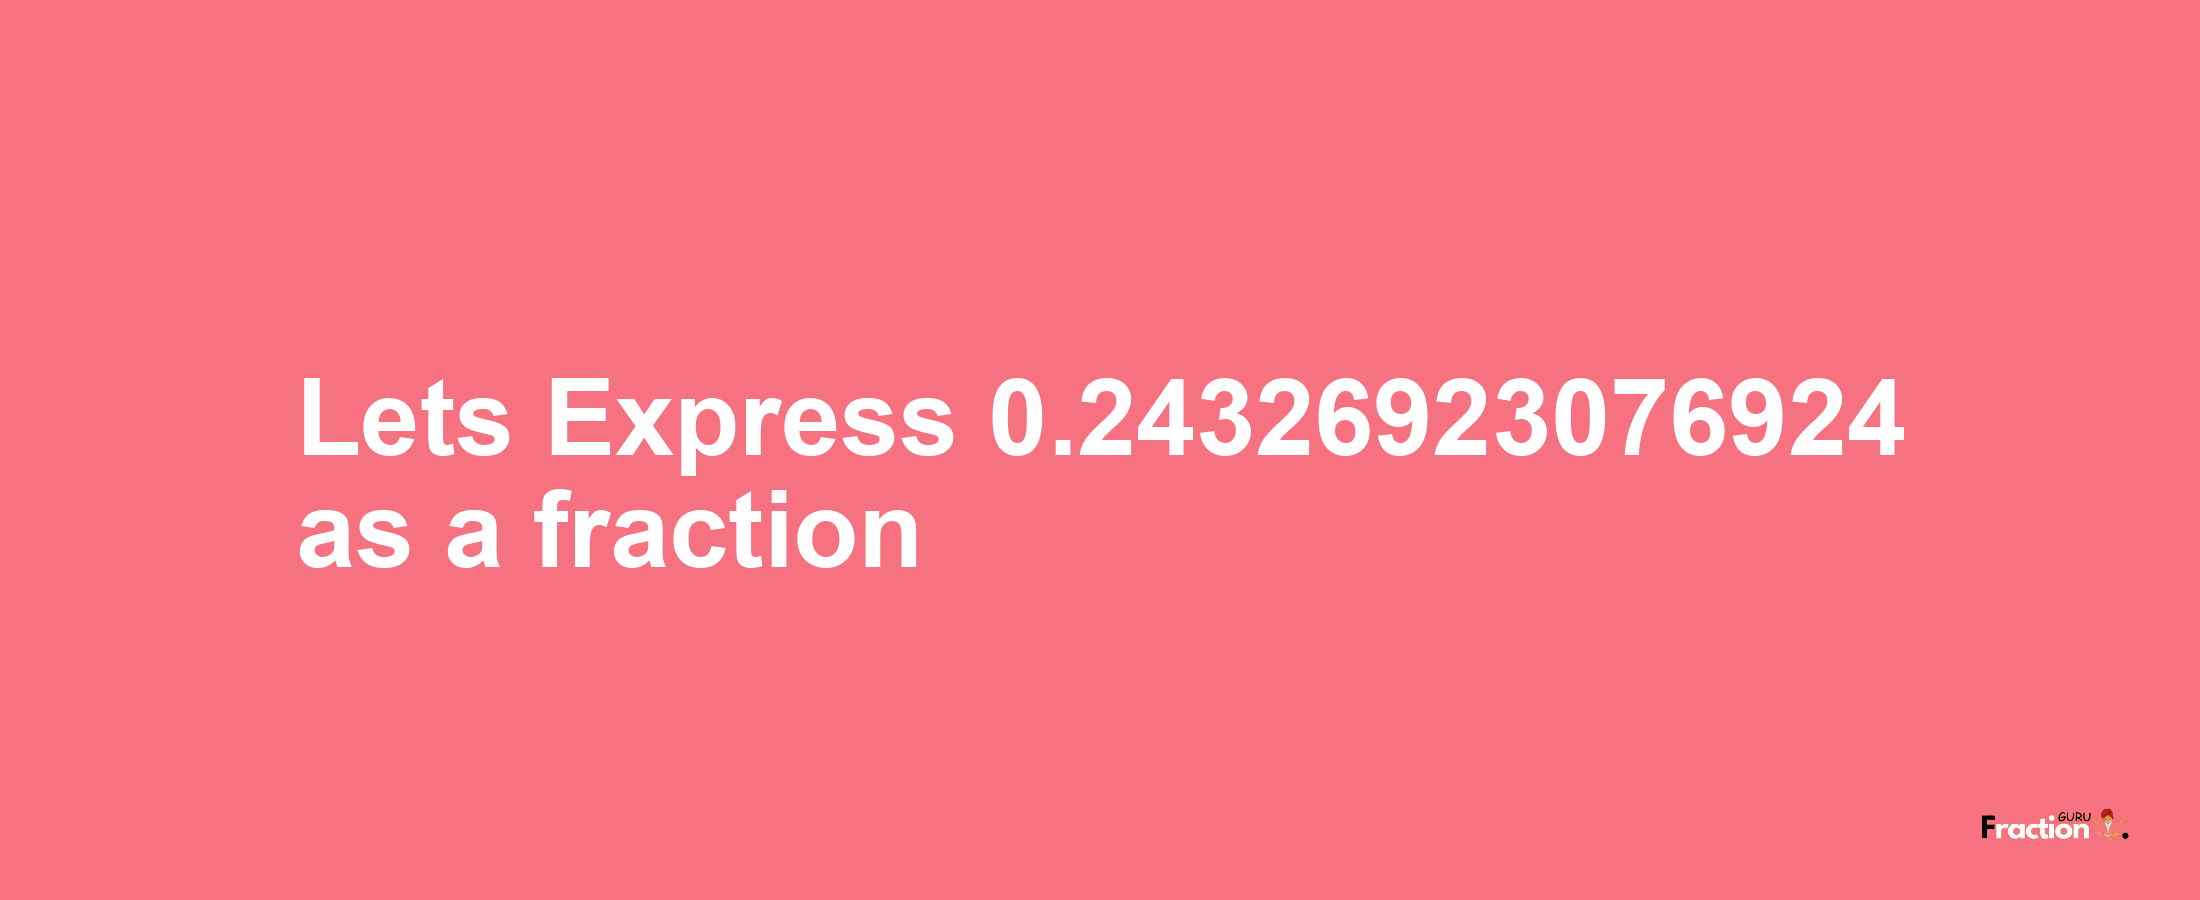 Lets Express 0.24326923076924 as afraction